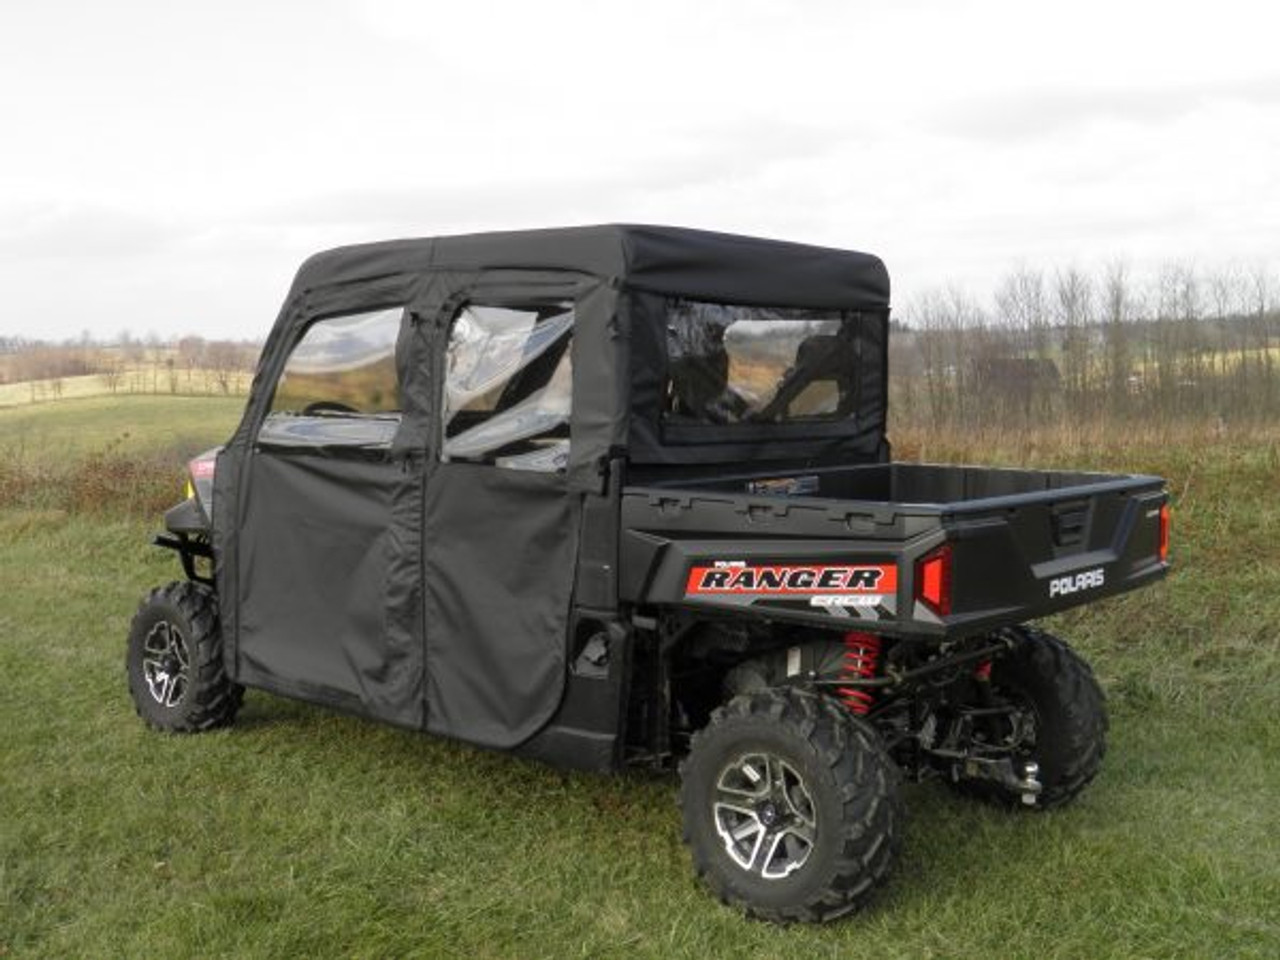 3 Star side x side Polaris Ranger Crew 1000/XP1000 full cab enclosure with vinyl windshield rear and side angle view